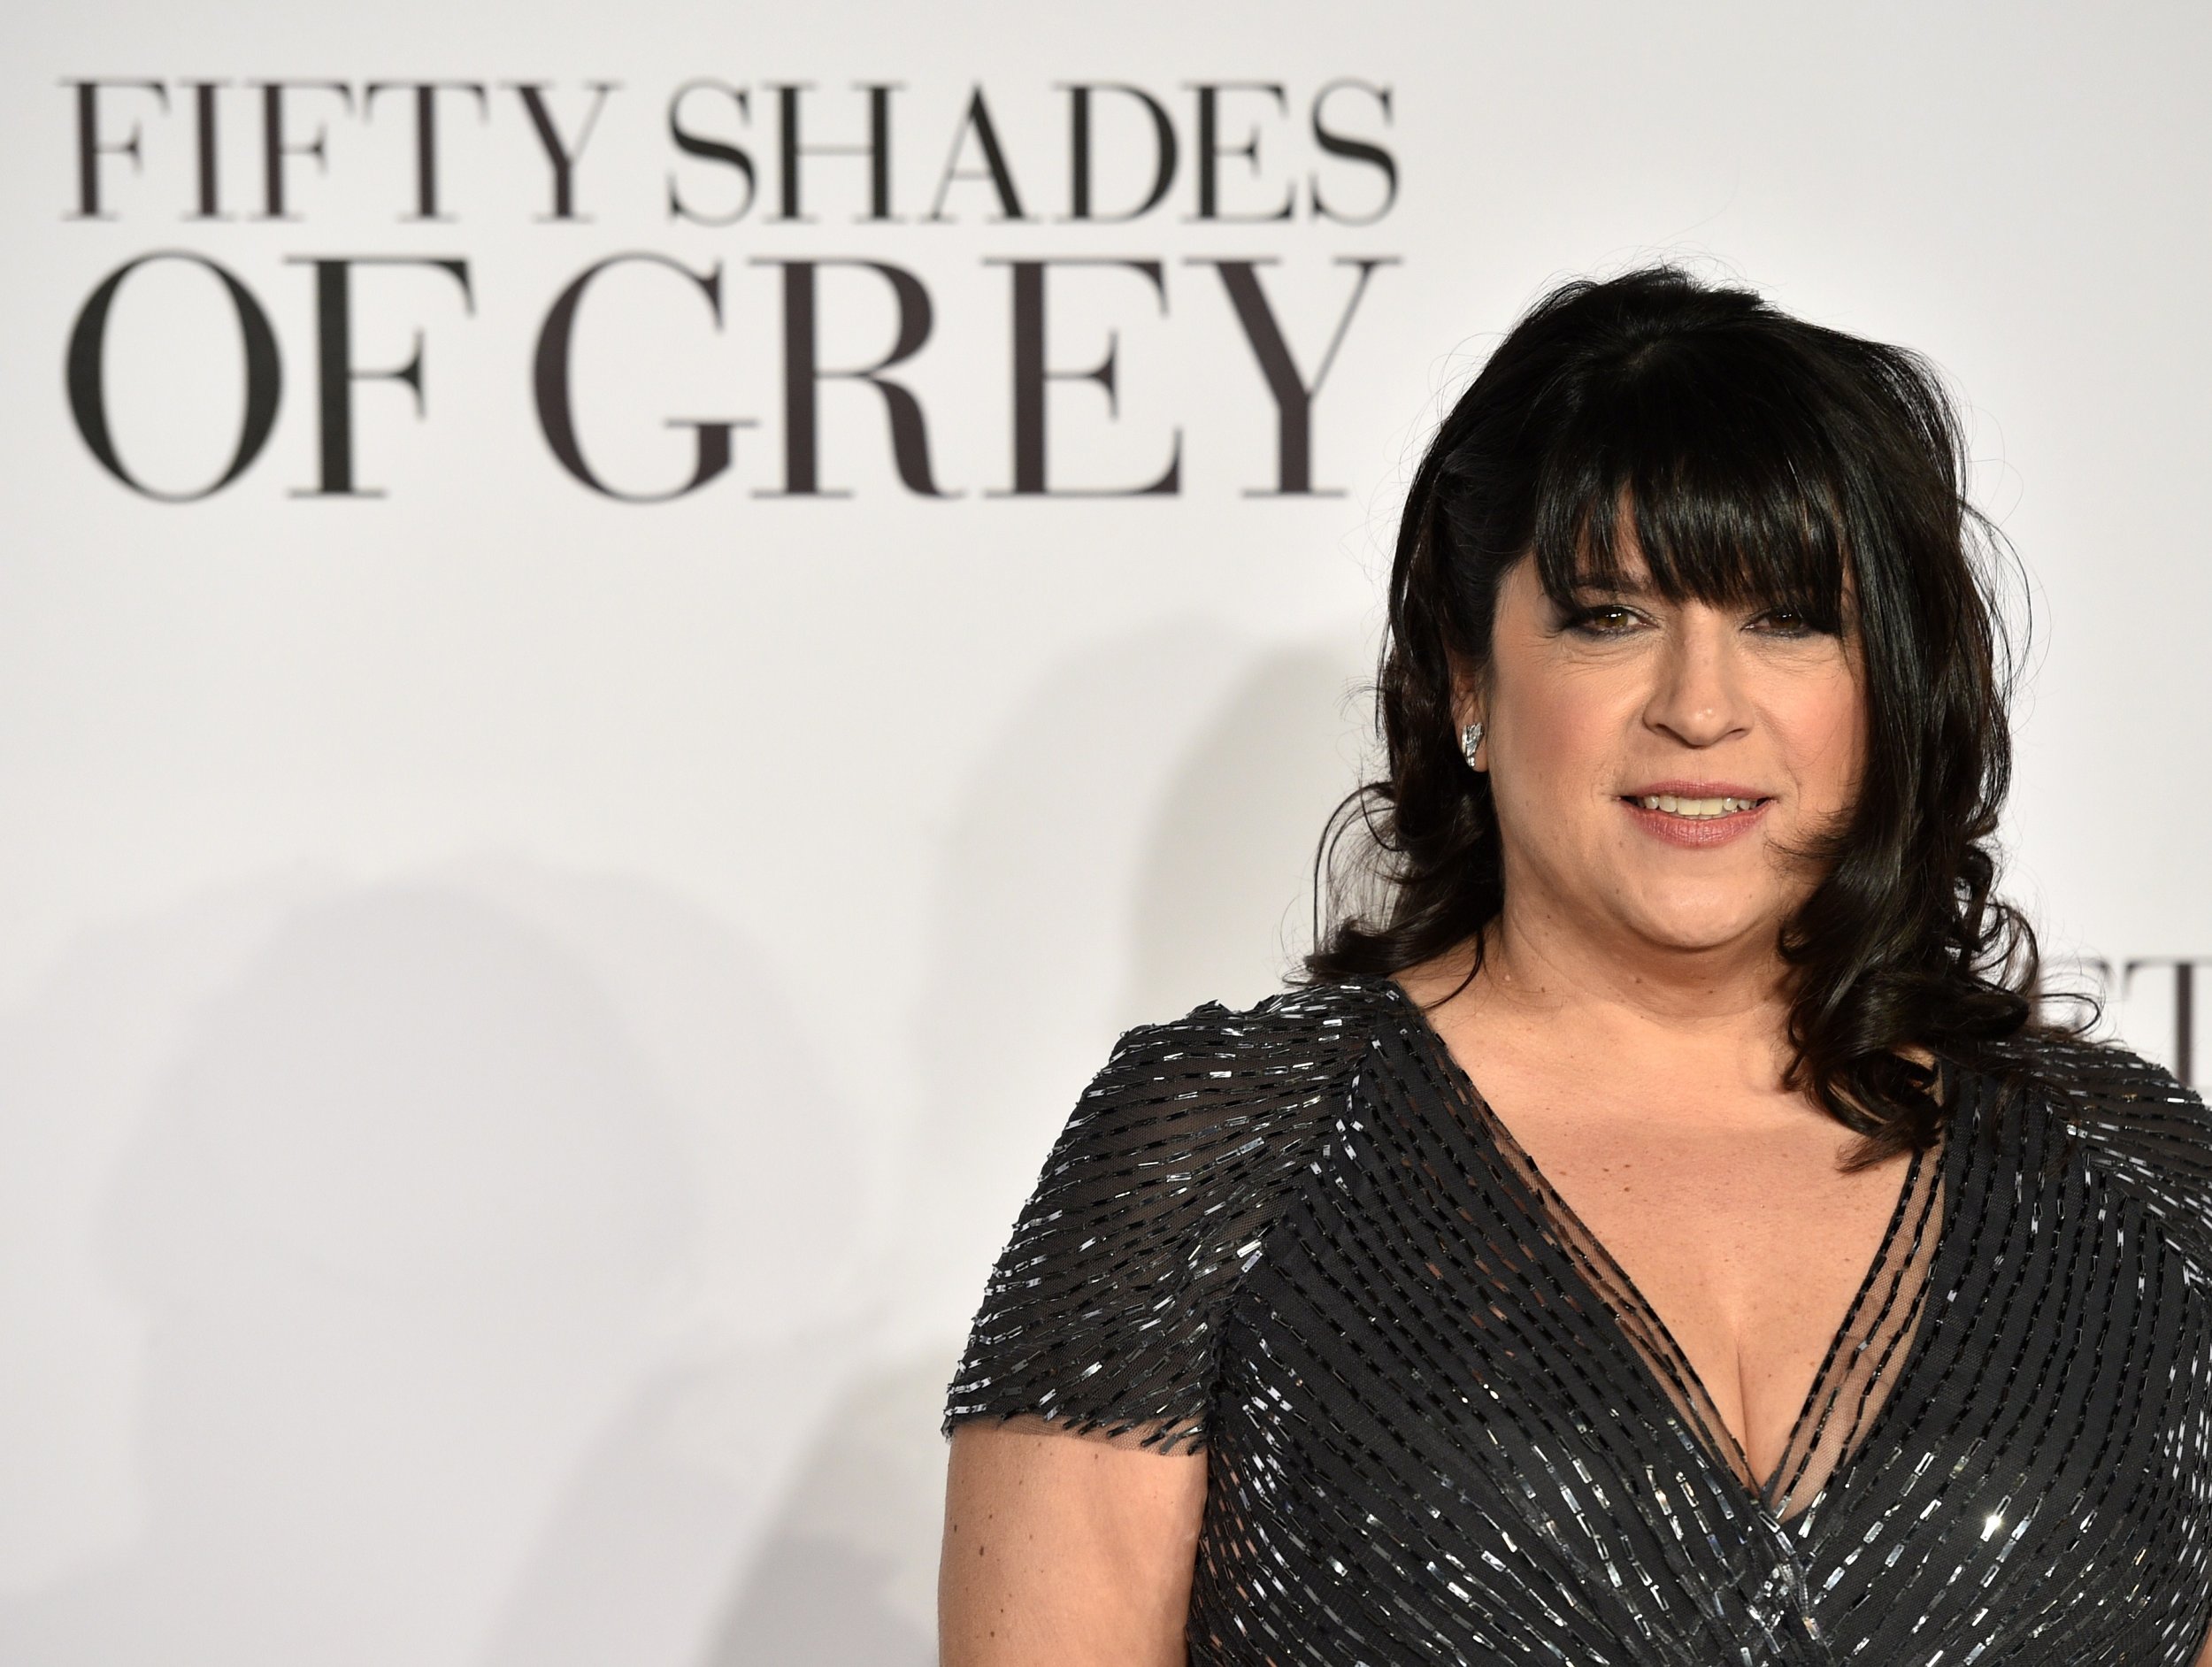 ‘Fifty Shades’ Author EL James Teases ‘Passionate, Erotic’ New Novel